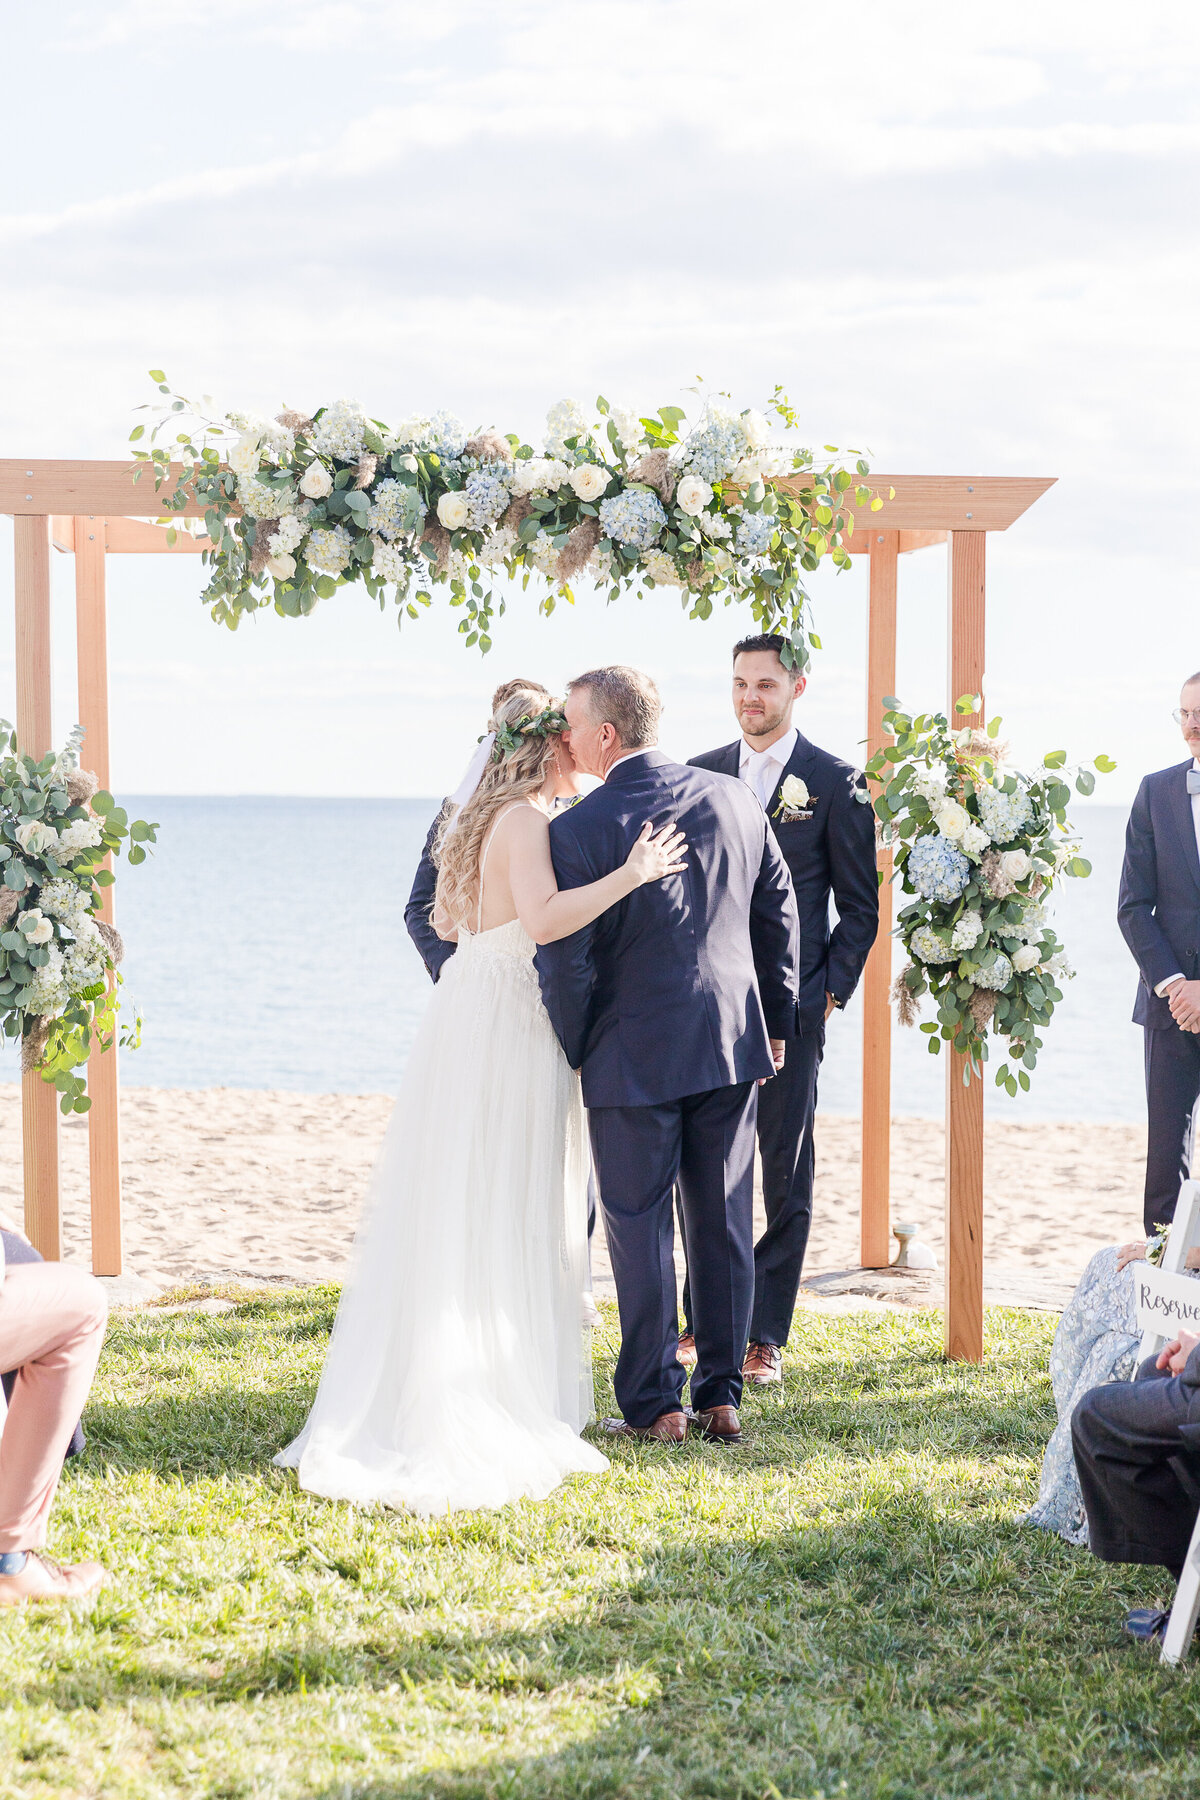 Father of the bride is seen kissing his daughter on the forehead as he gives her away at her wedding ceremony. Behind them is the ocean. Captured by best New England wedding photographer Lia Rose Weddings.